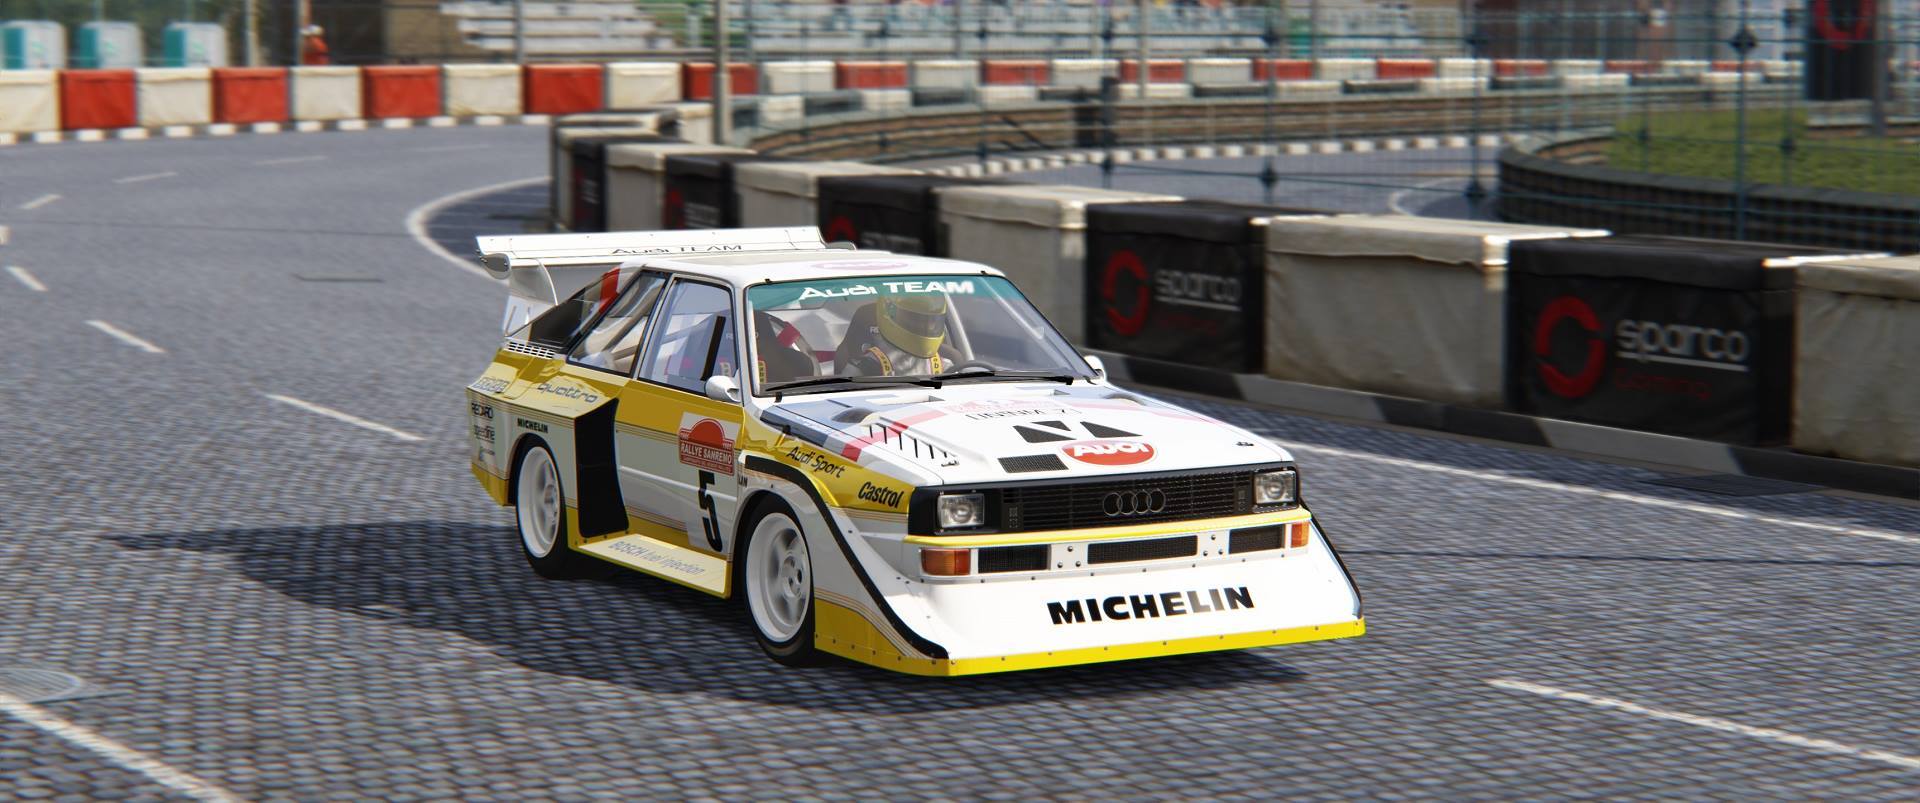 More information about "Assetto Corsa: Audi extra in arrivo..."